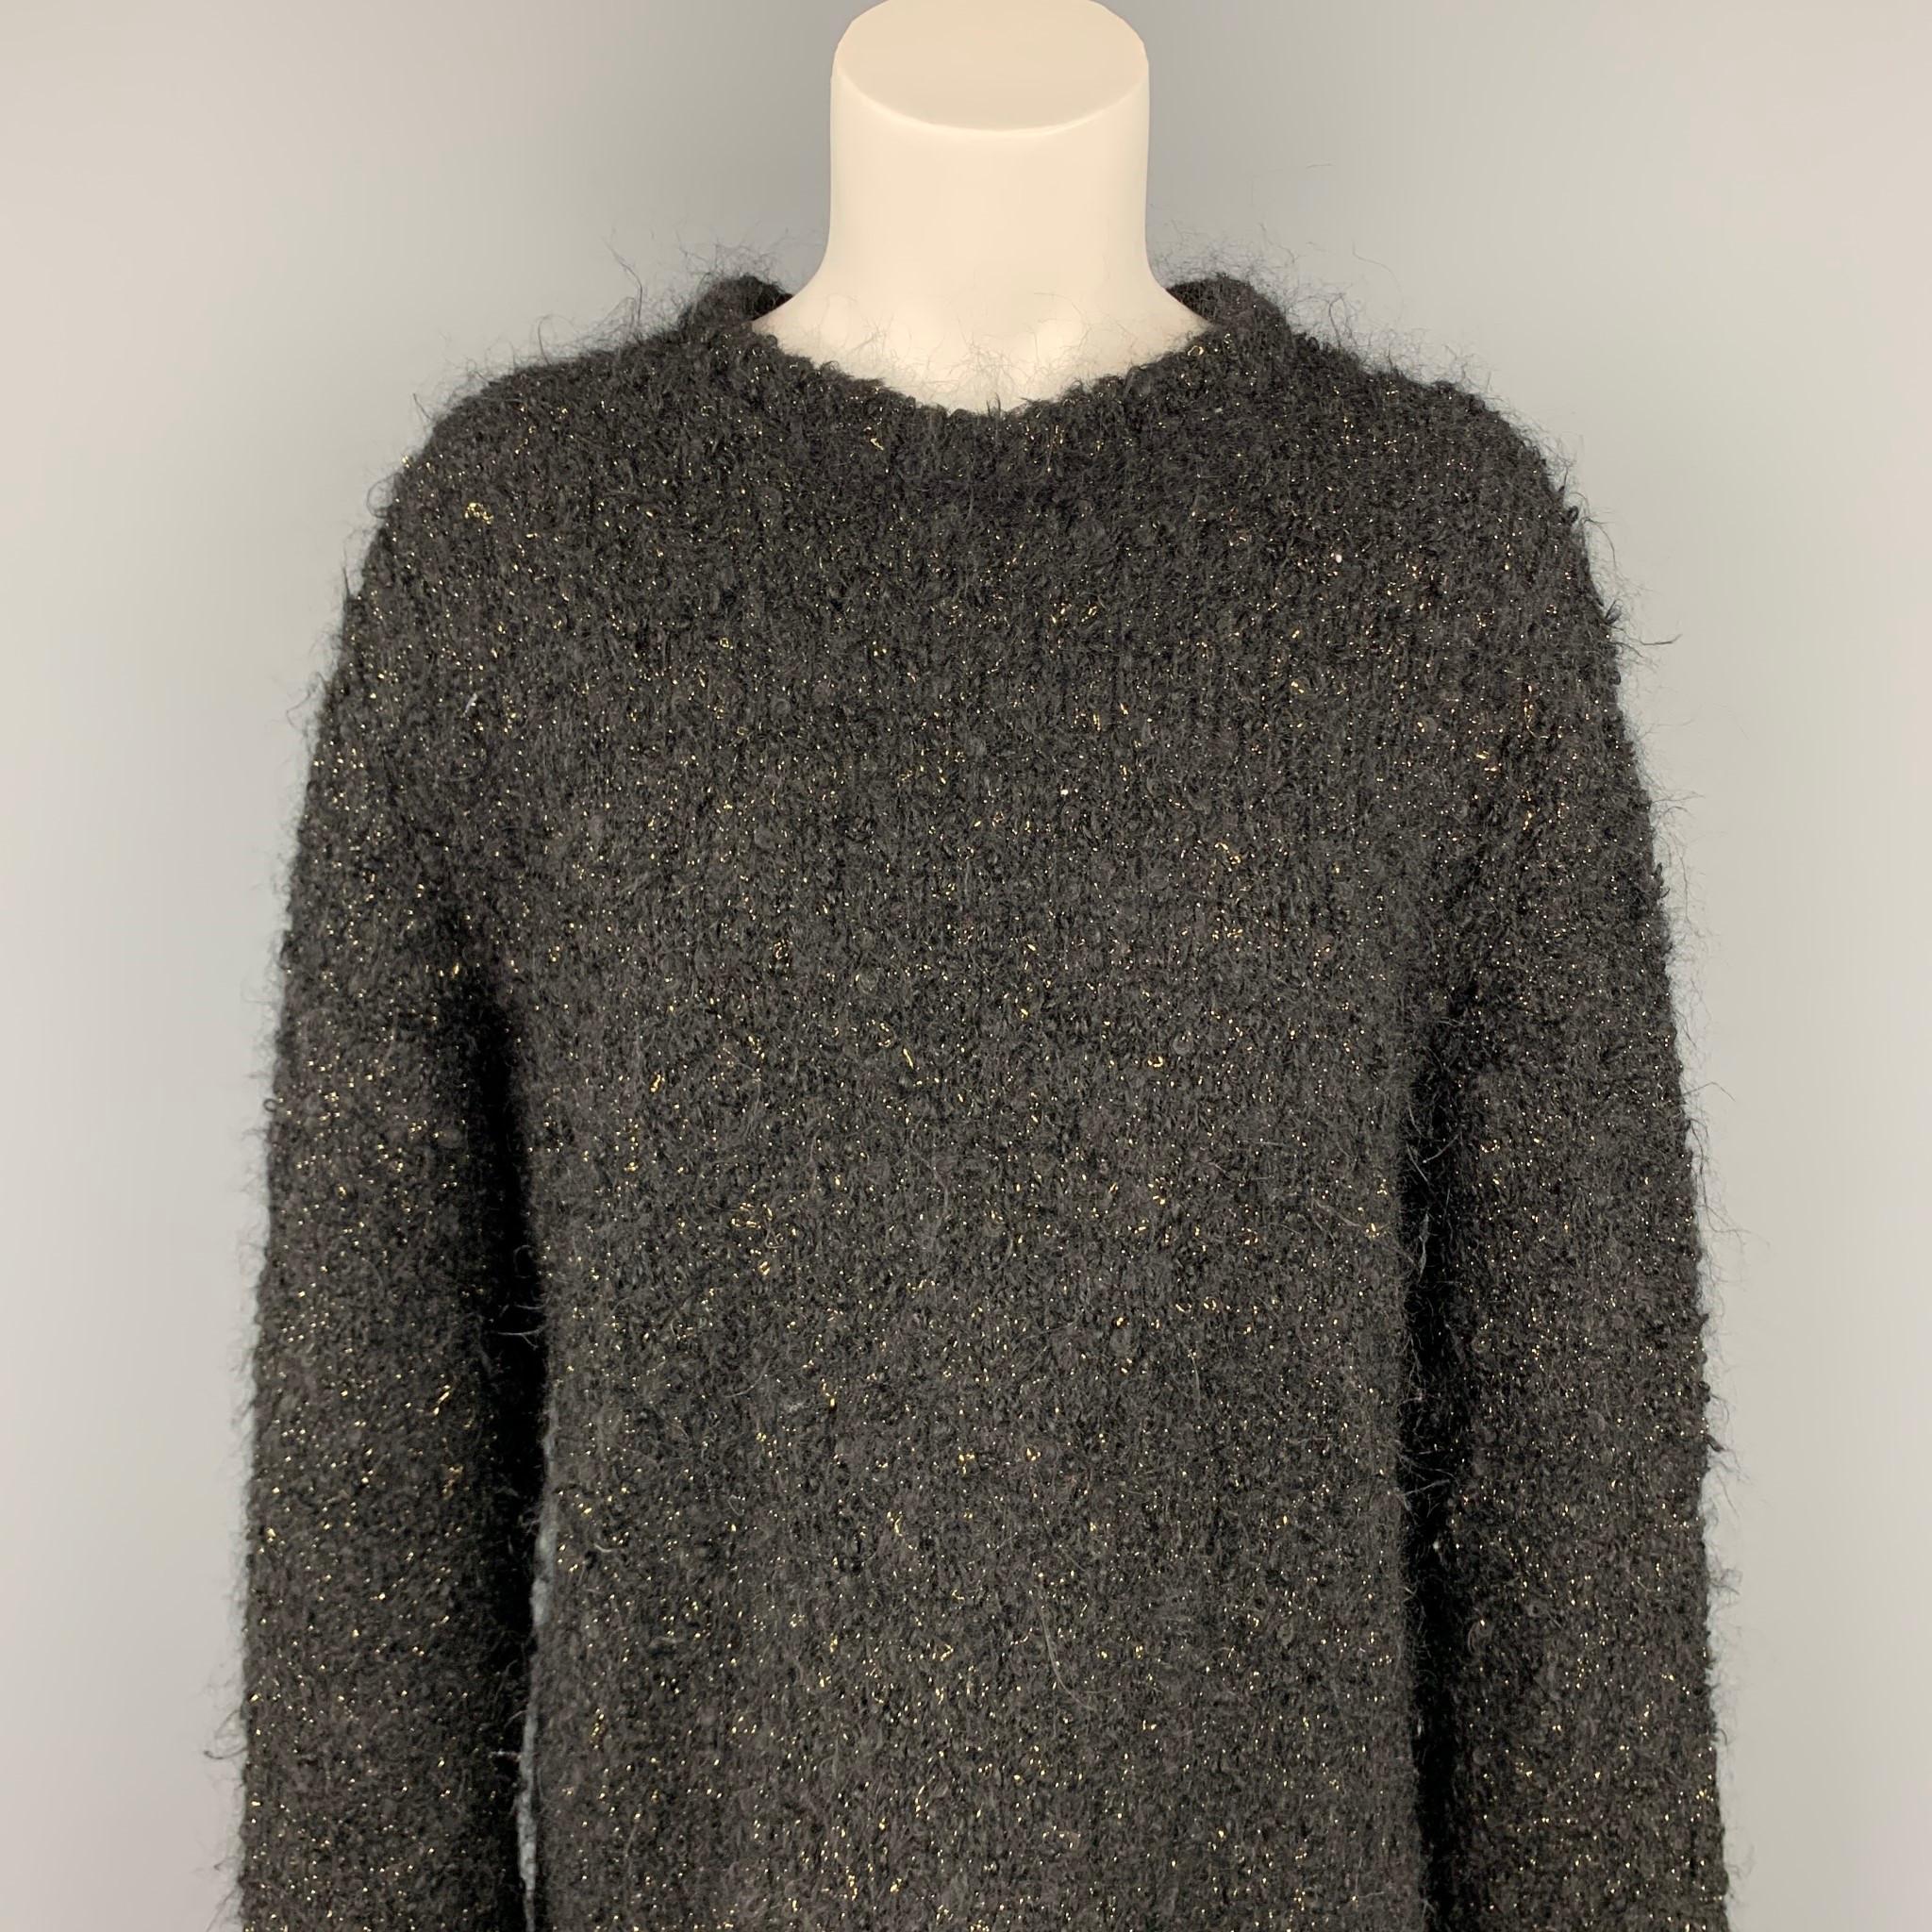 COMME des GARCONS sweater comes in a black & gold wool / polyester featuring a oversized style and a crew-neck. Made in Japan.

Very Good Pre-Owned Condition.
Marked: L

Measurements:

Shoulder: 19 in.
Bust: 42 in.
Sleeve: 28 in.
Length: 24 in. 